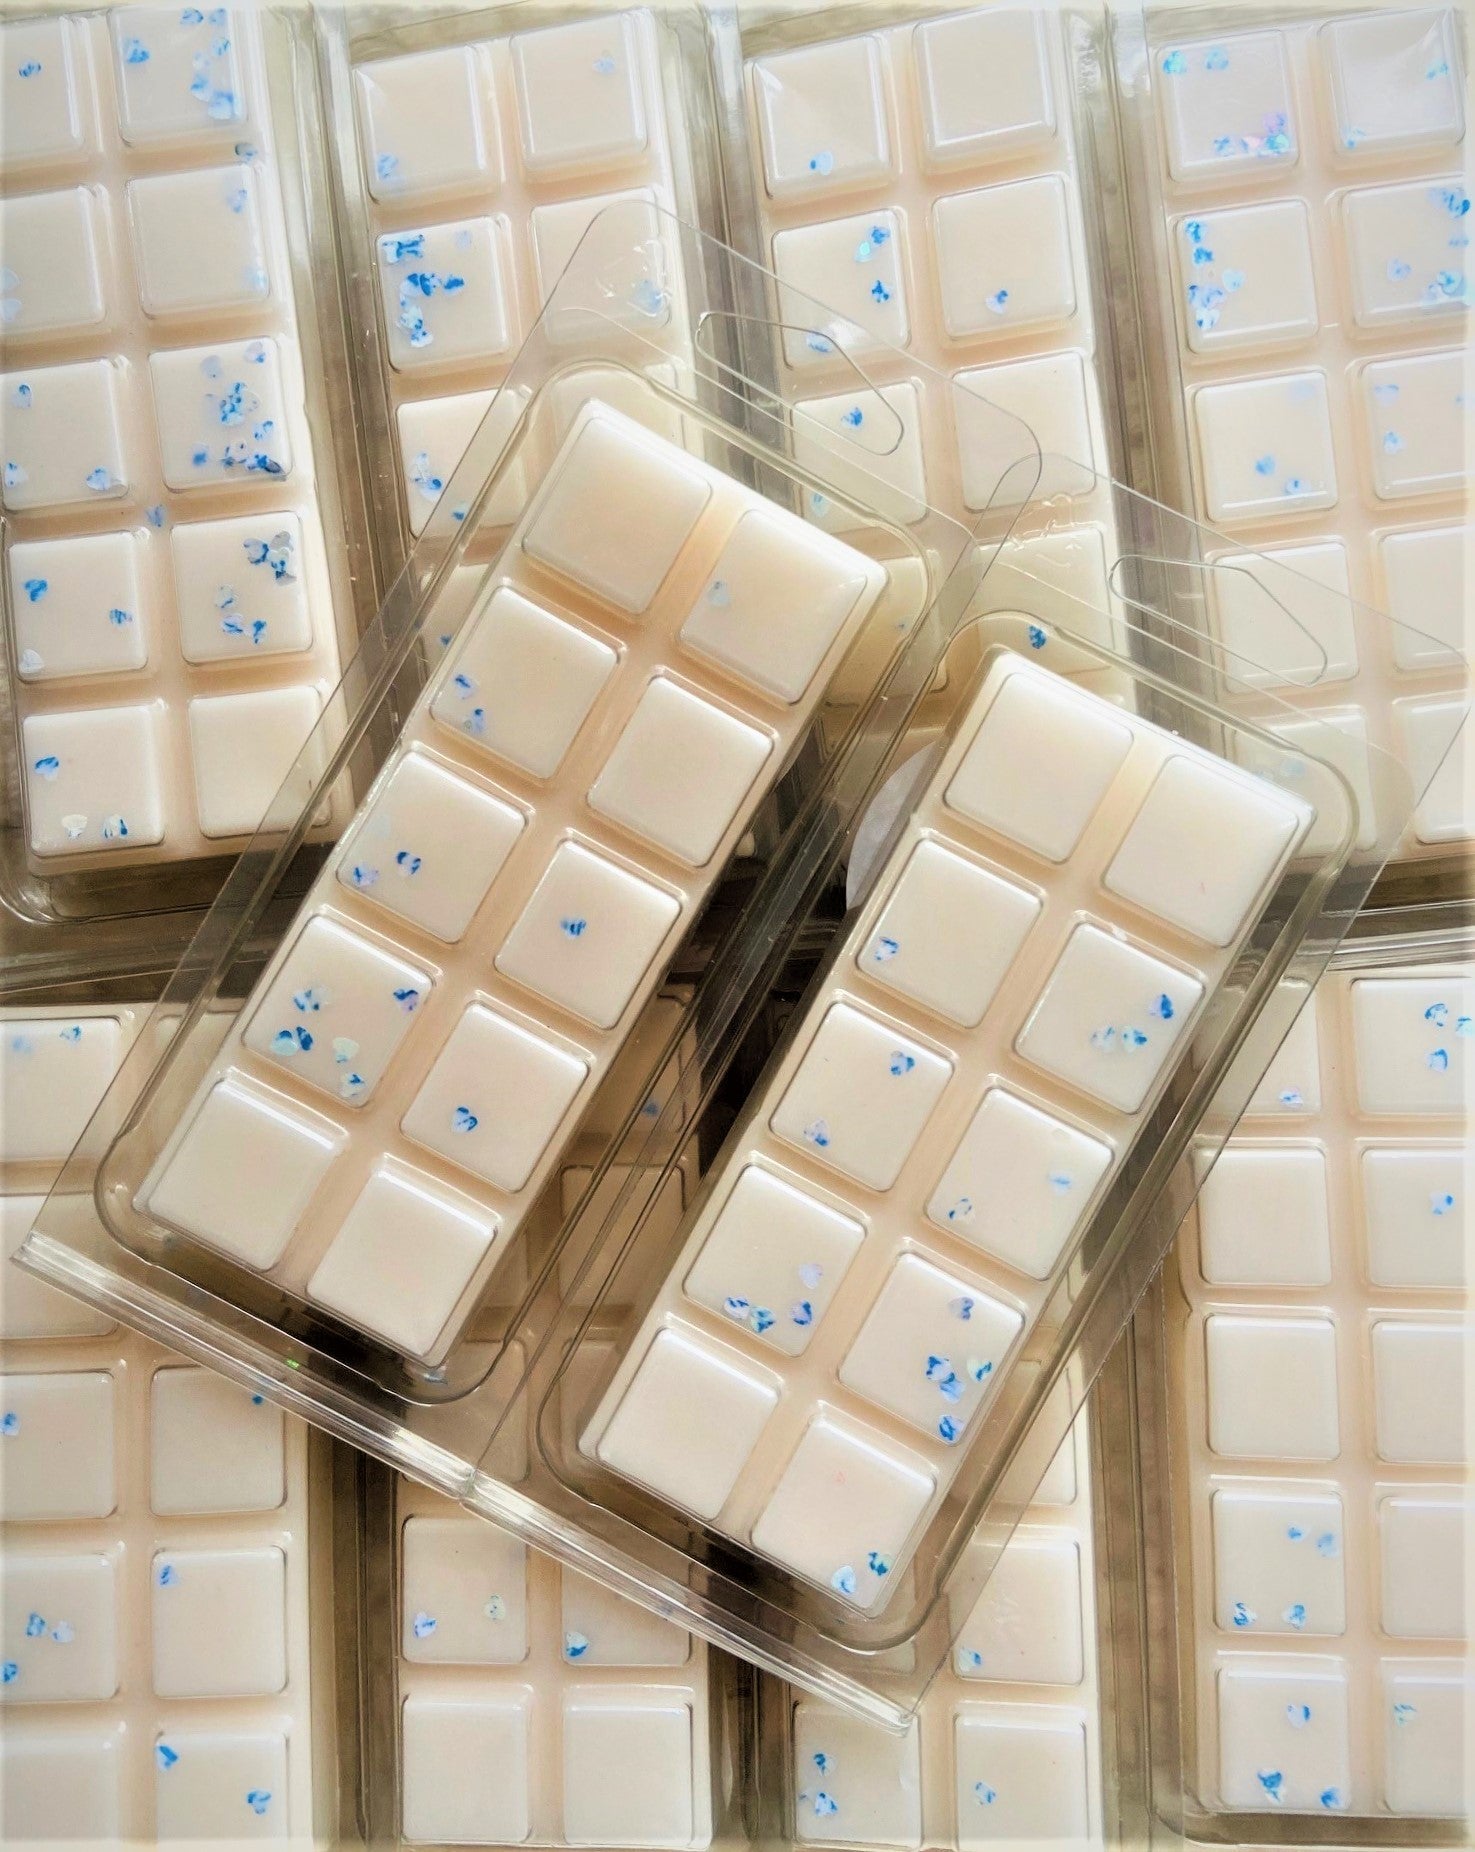 Multiple trays of white chocolate bars with blue sprinkles, packaged in clear plastic, now feature The Soap Gals Tranquil Sleep Wax Melts.